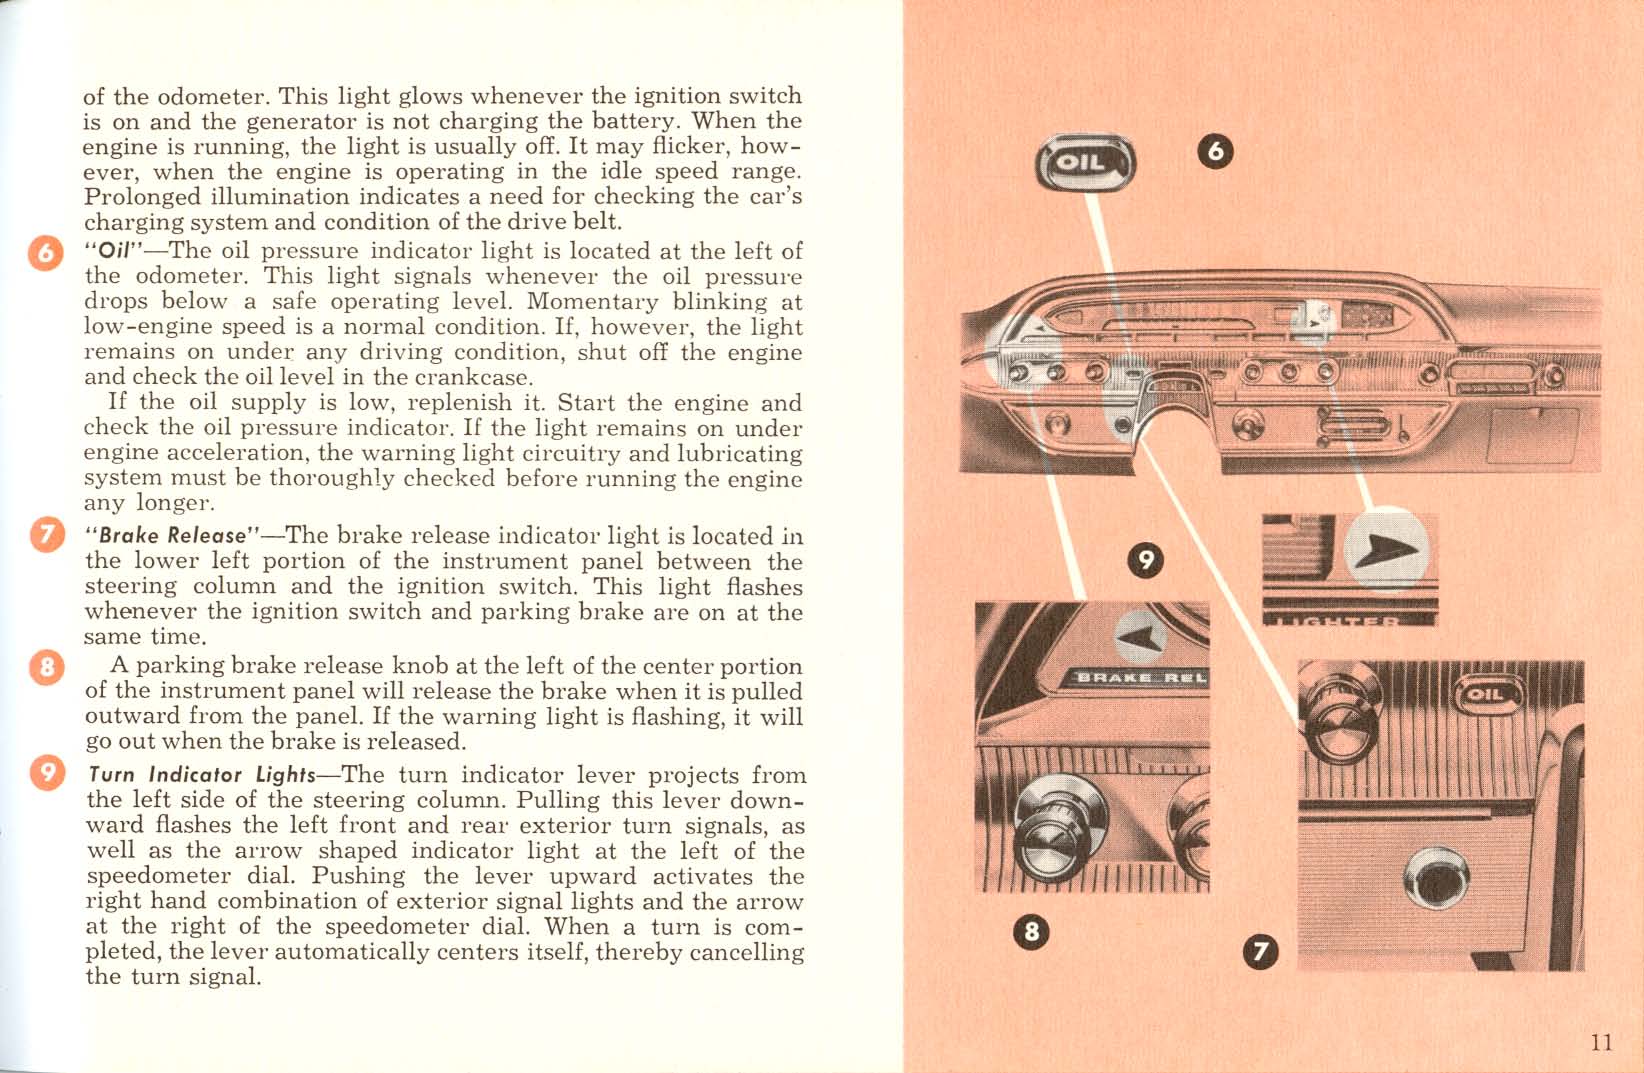 1961 Mercury Owners Manual Page 32